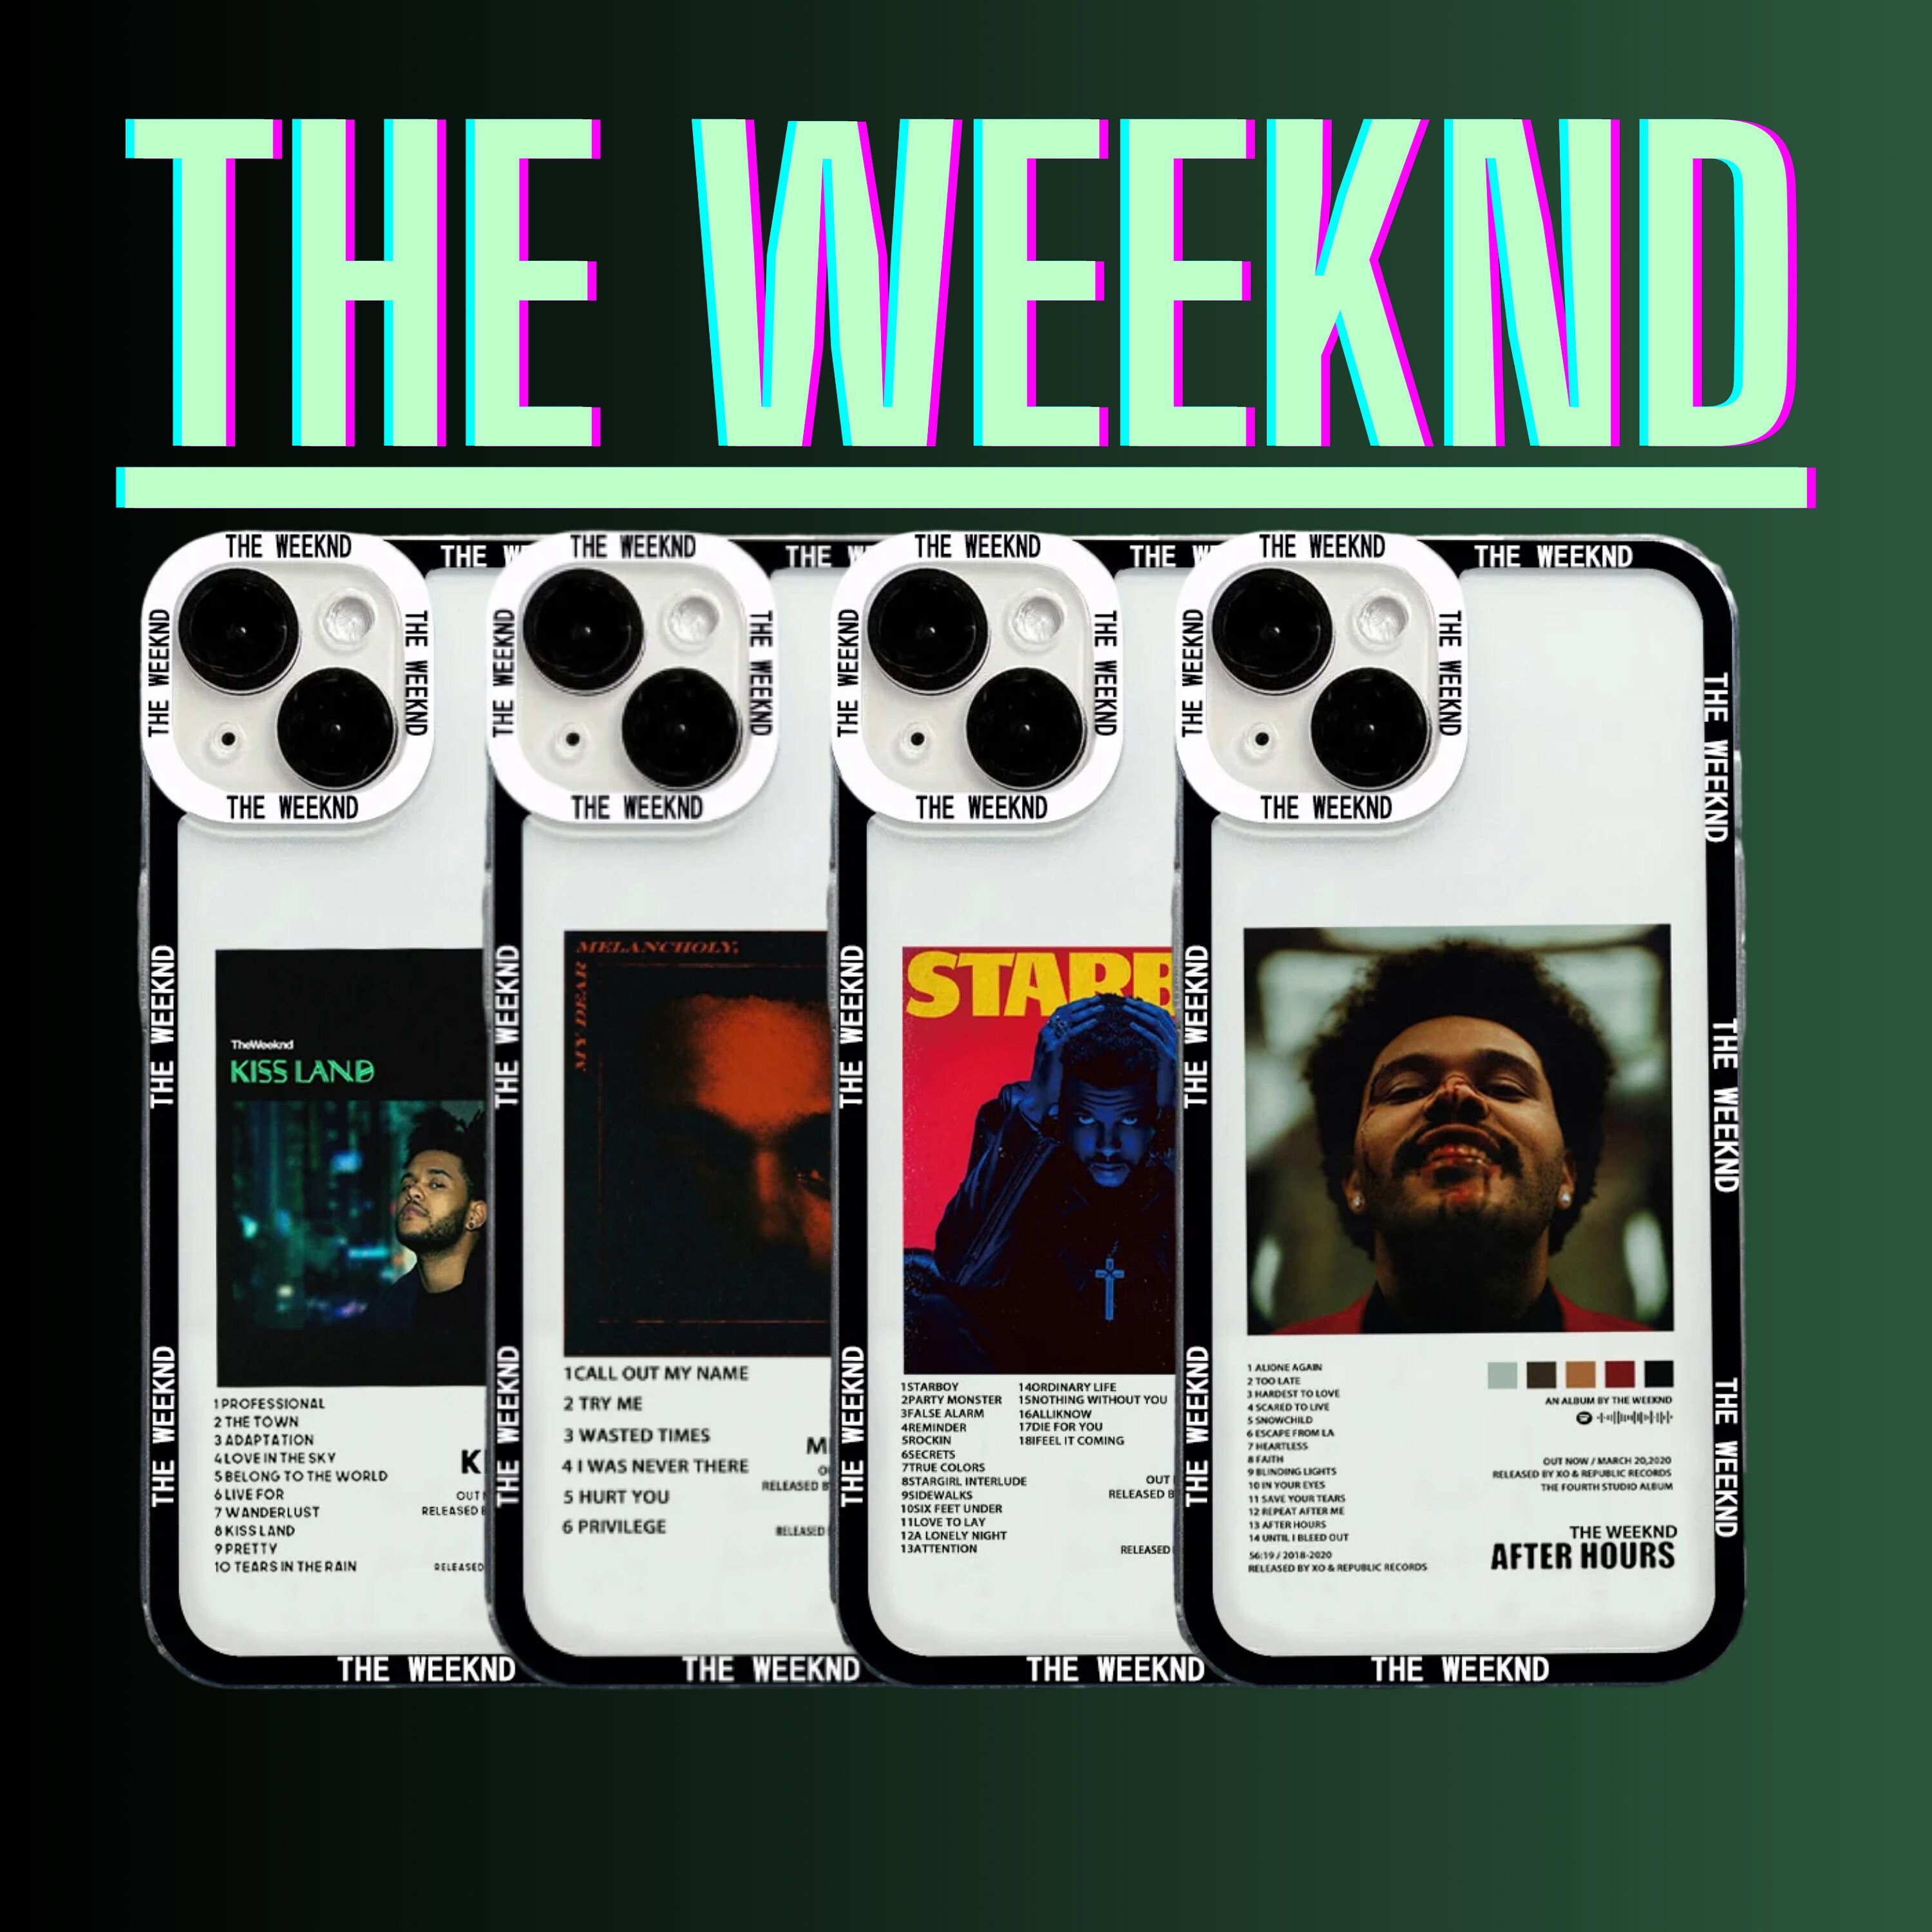 🔥 A SPECIAL EXPERIENCE WITH SPOTIFY TOMORROW : TheWeeknd